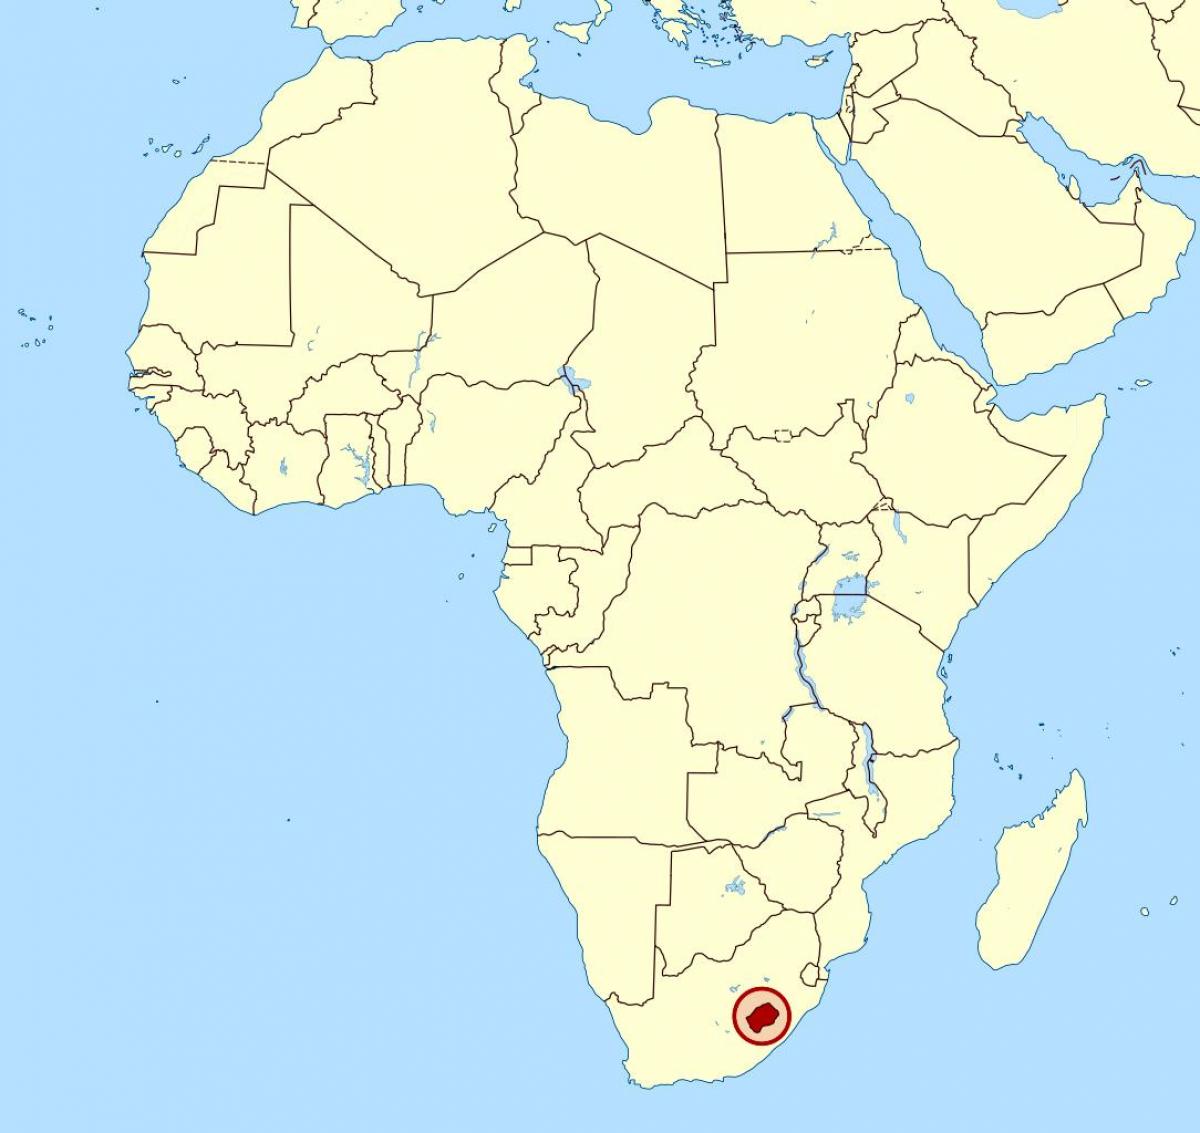 map of Lesotho on map of africa